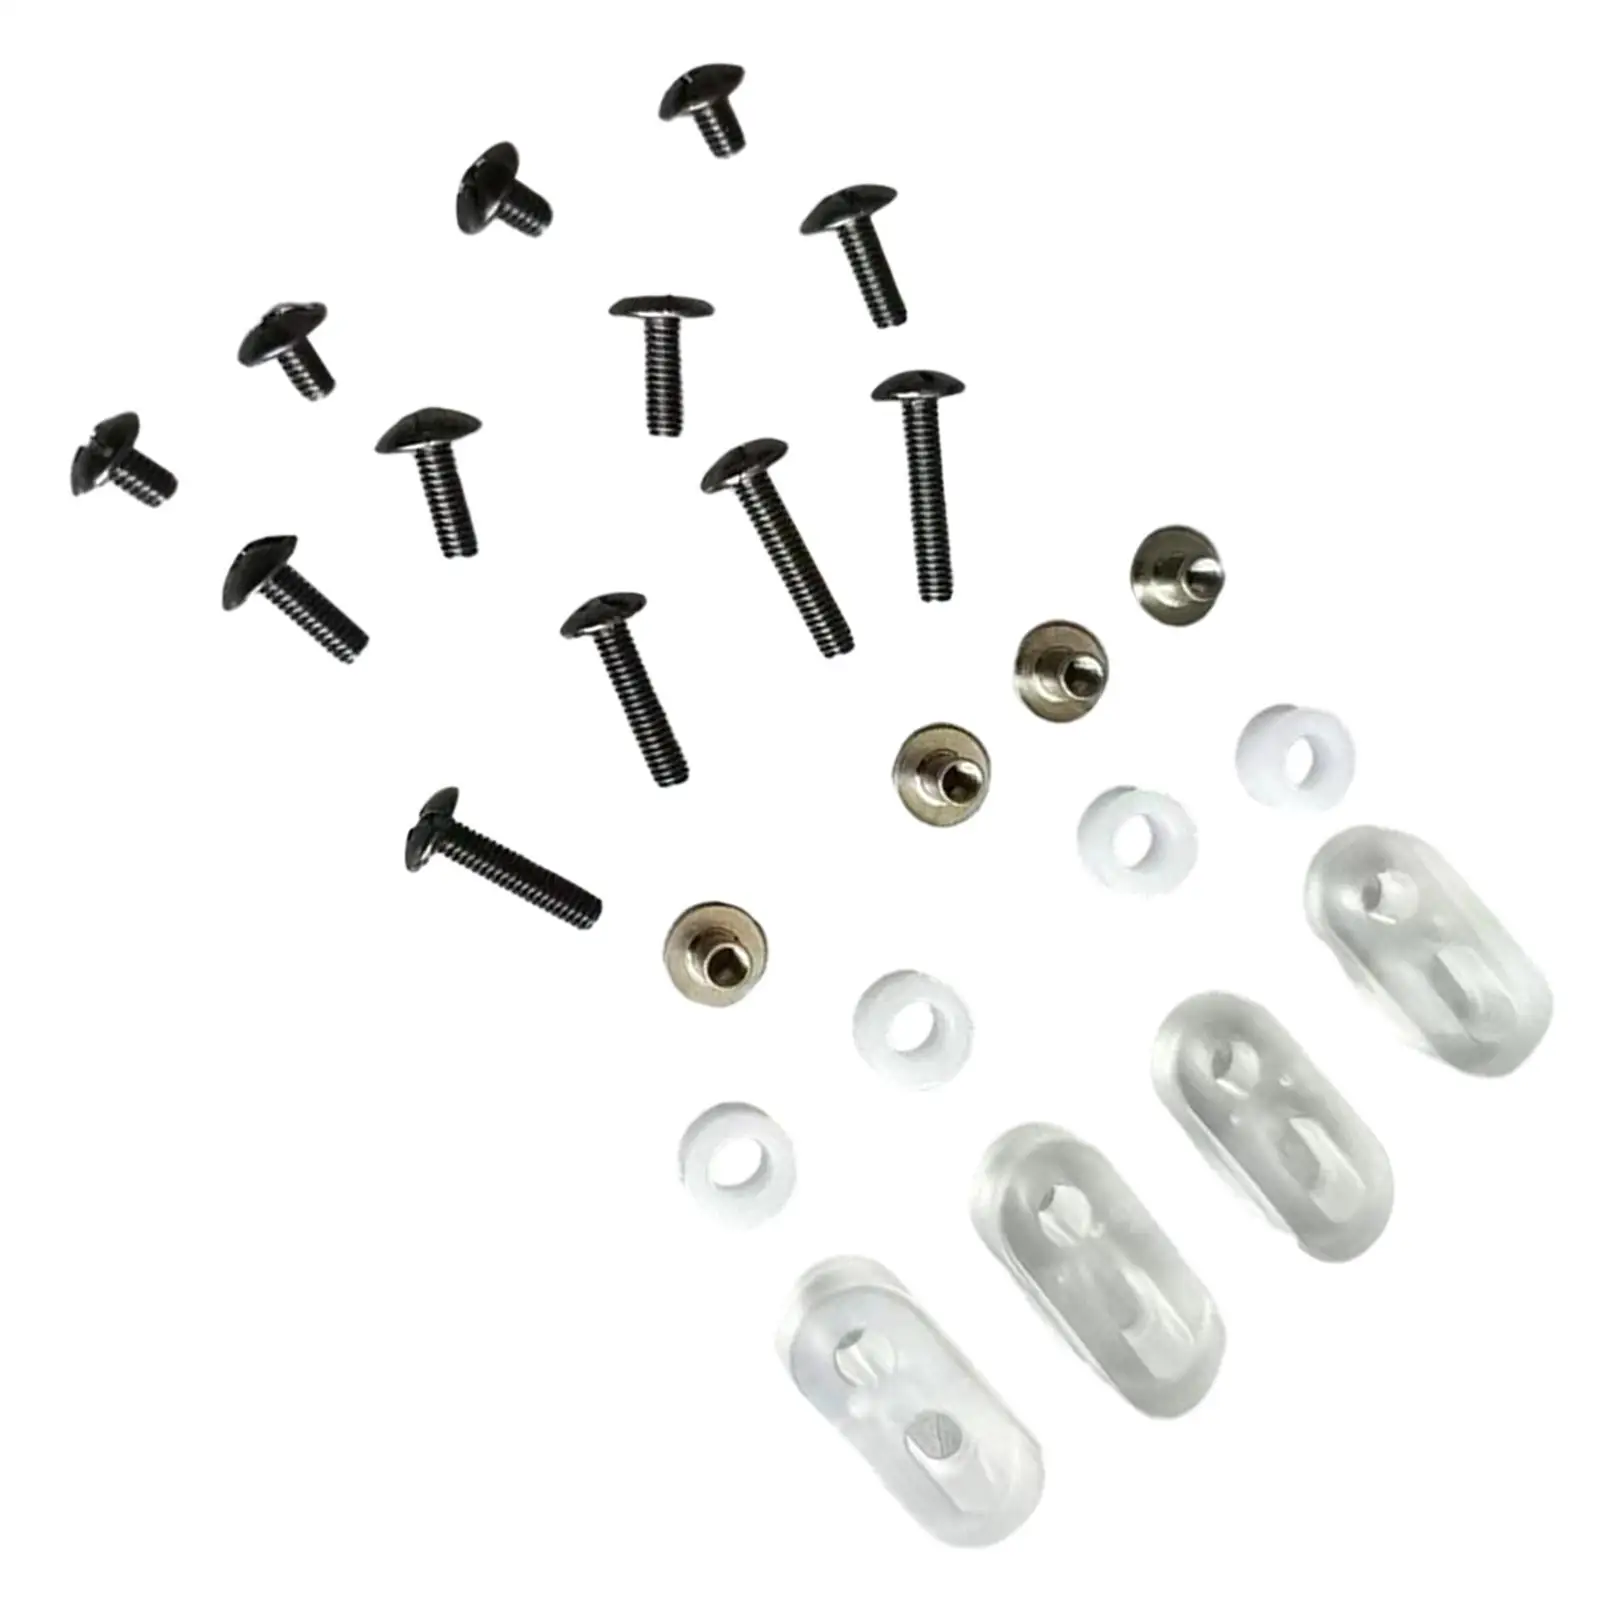 Ice Hockey Visor Hardware Kit Screw Washers Nuts Replacement Safety Hockey Equipment Accessories Fixings Back up Hardwares